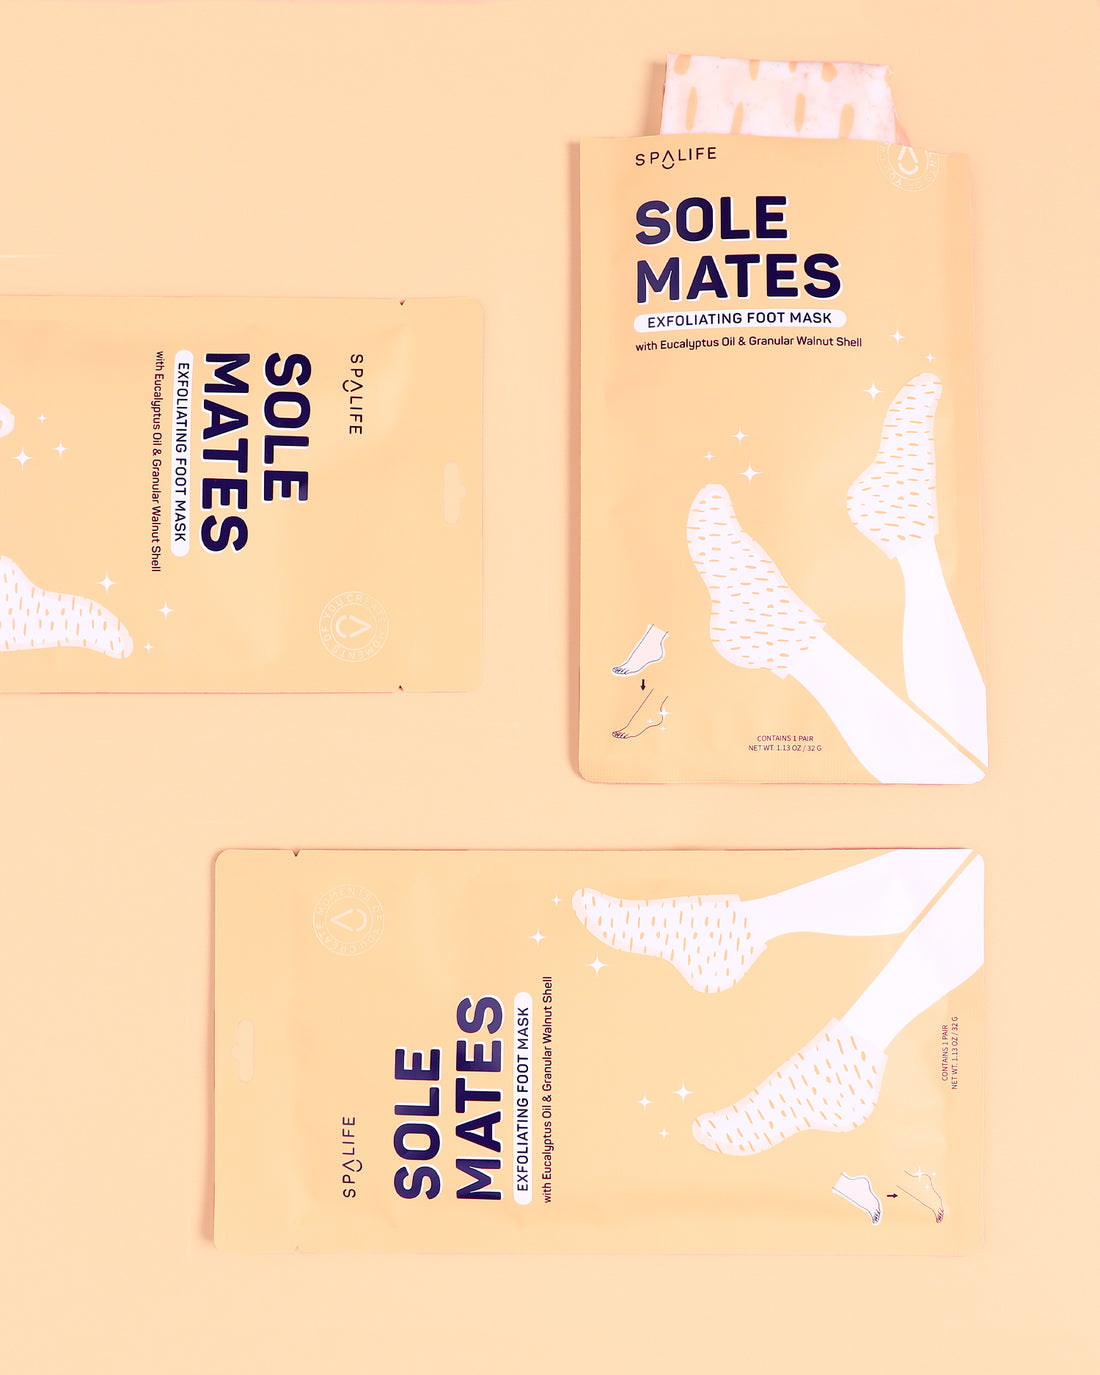 Sole_mates_foot_mask_packet_5-844